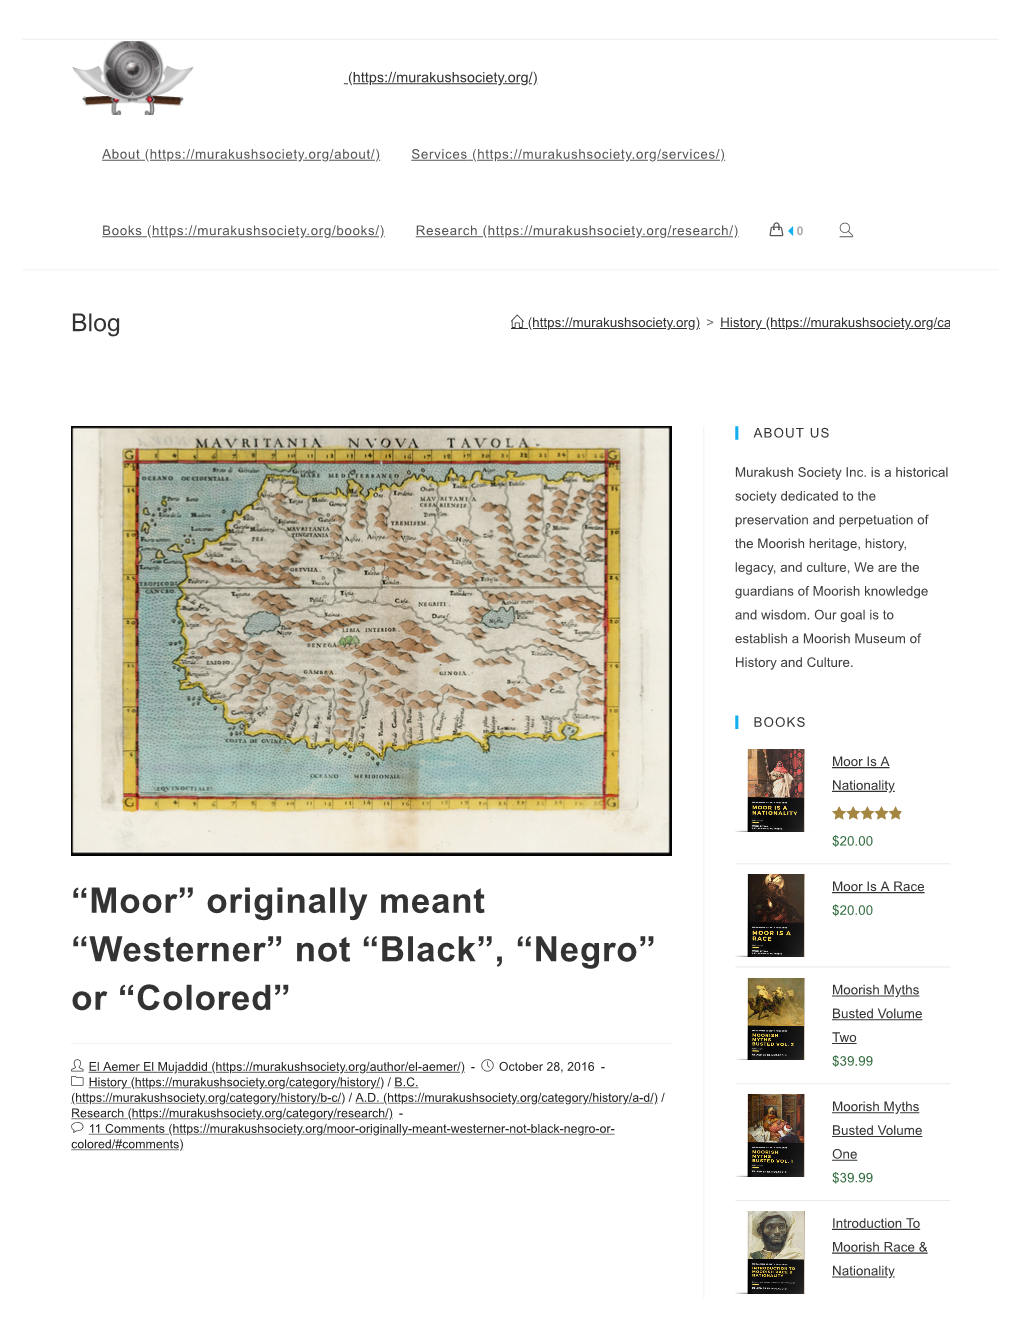 “Moor” Originally Meant “Westerner” Not “Black”, “Negro” Or “Colored”